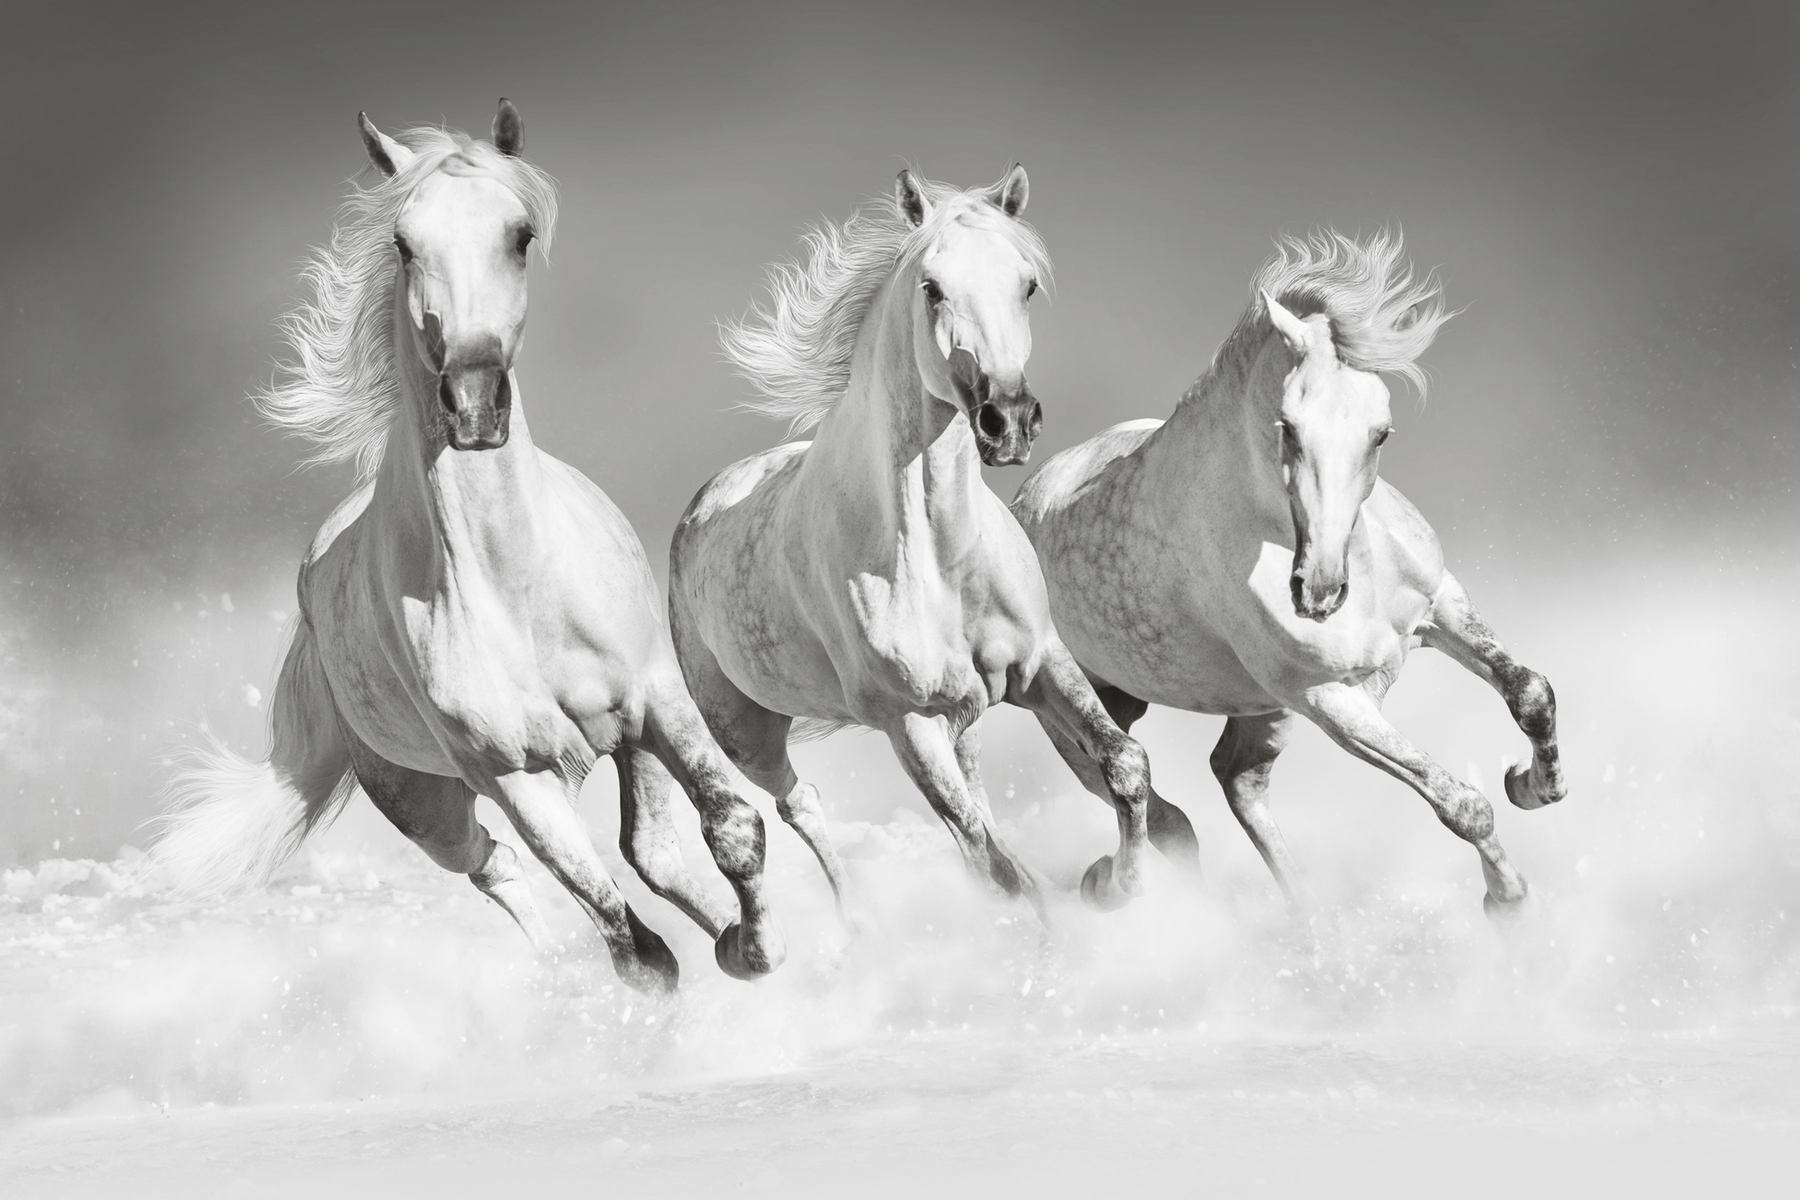 Horses black and white wallpaper - Happywall